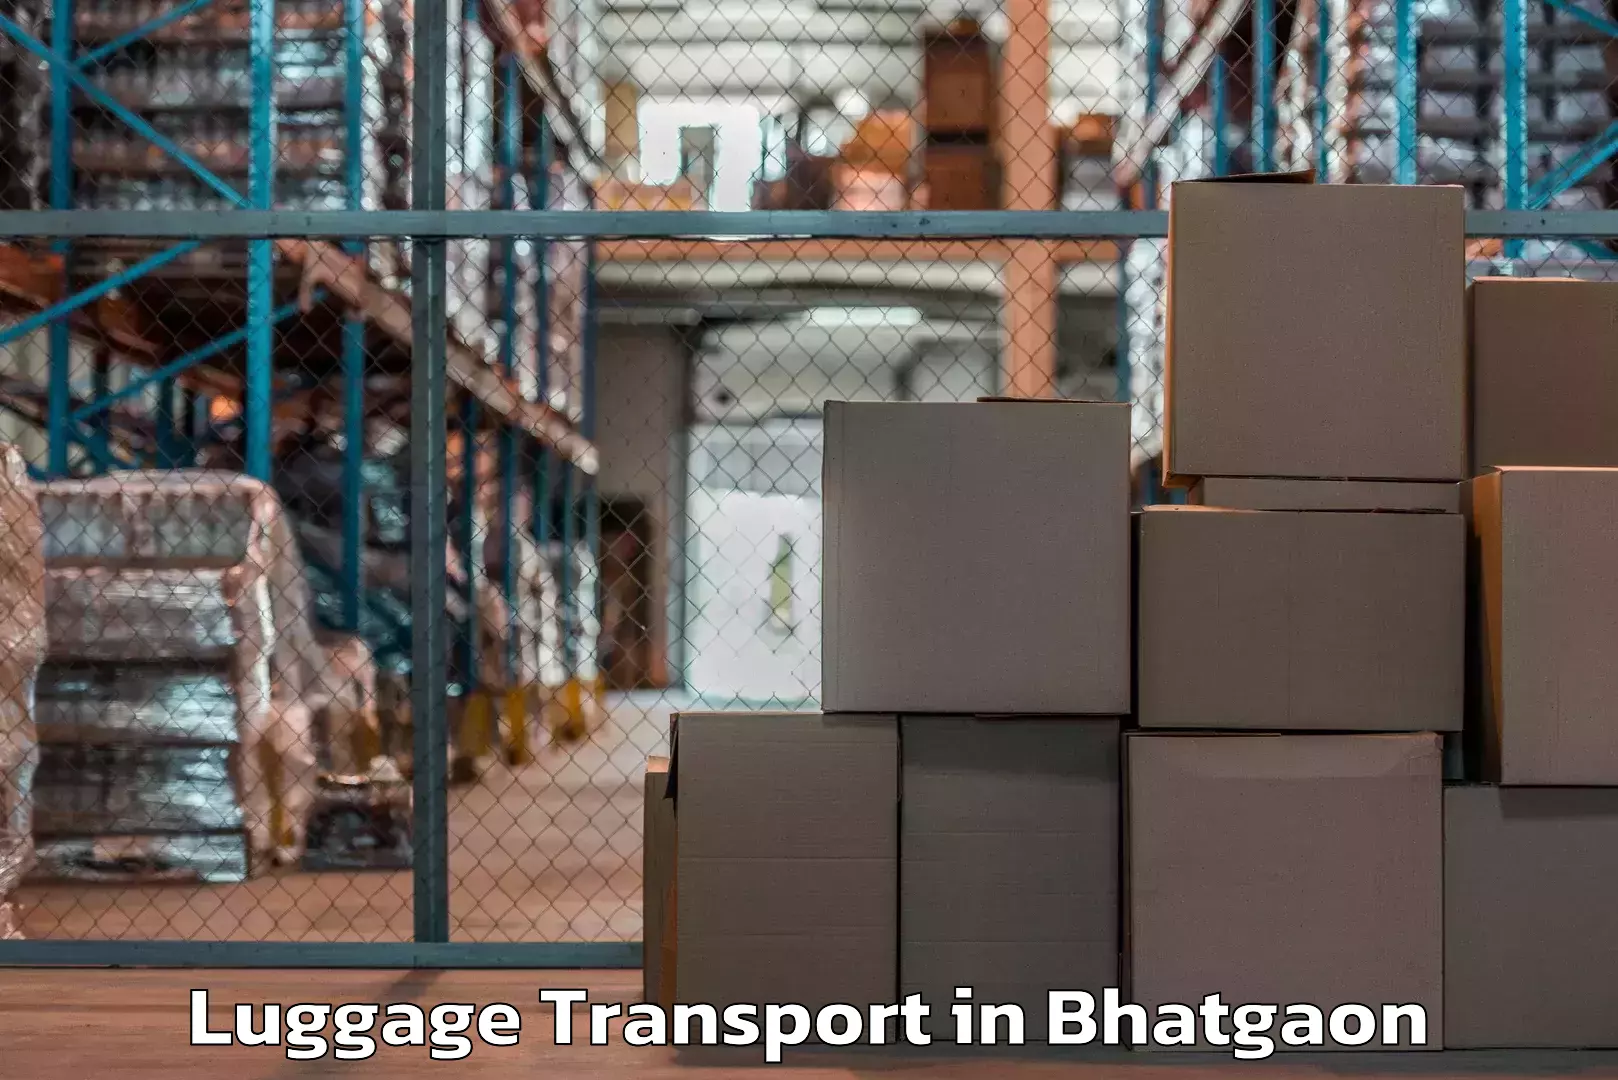 Luggage transport consulting in Bhatgaon